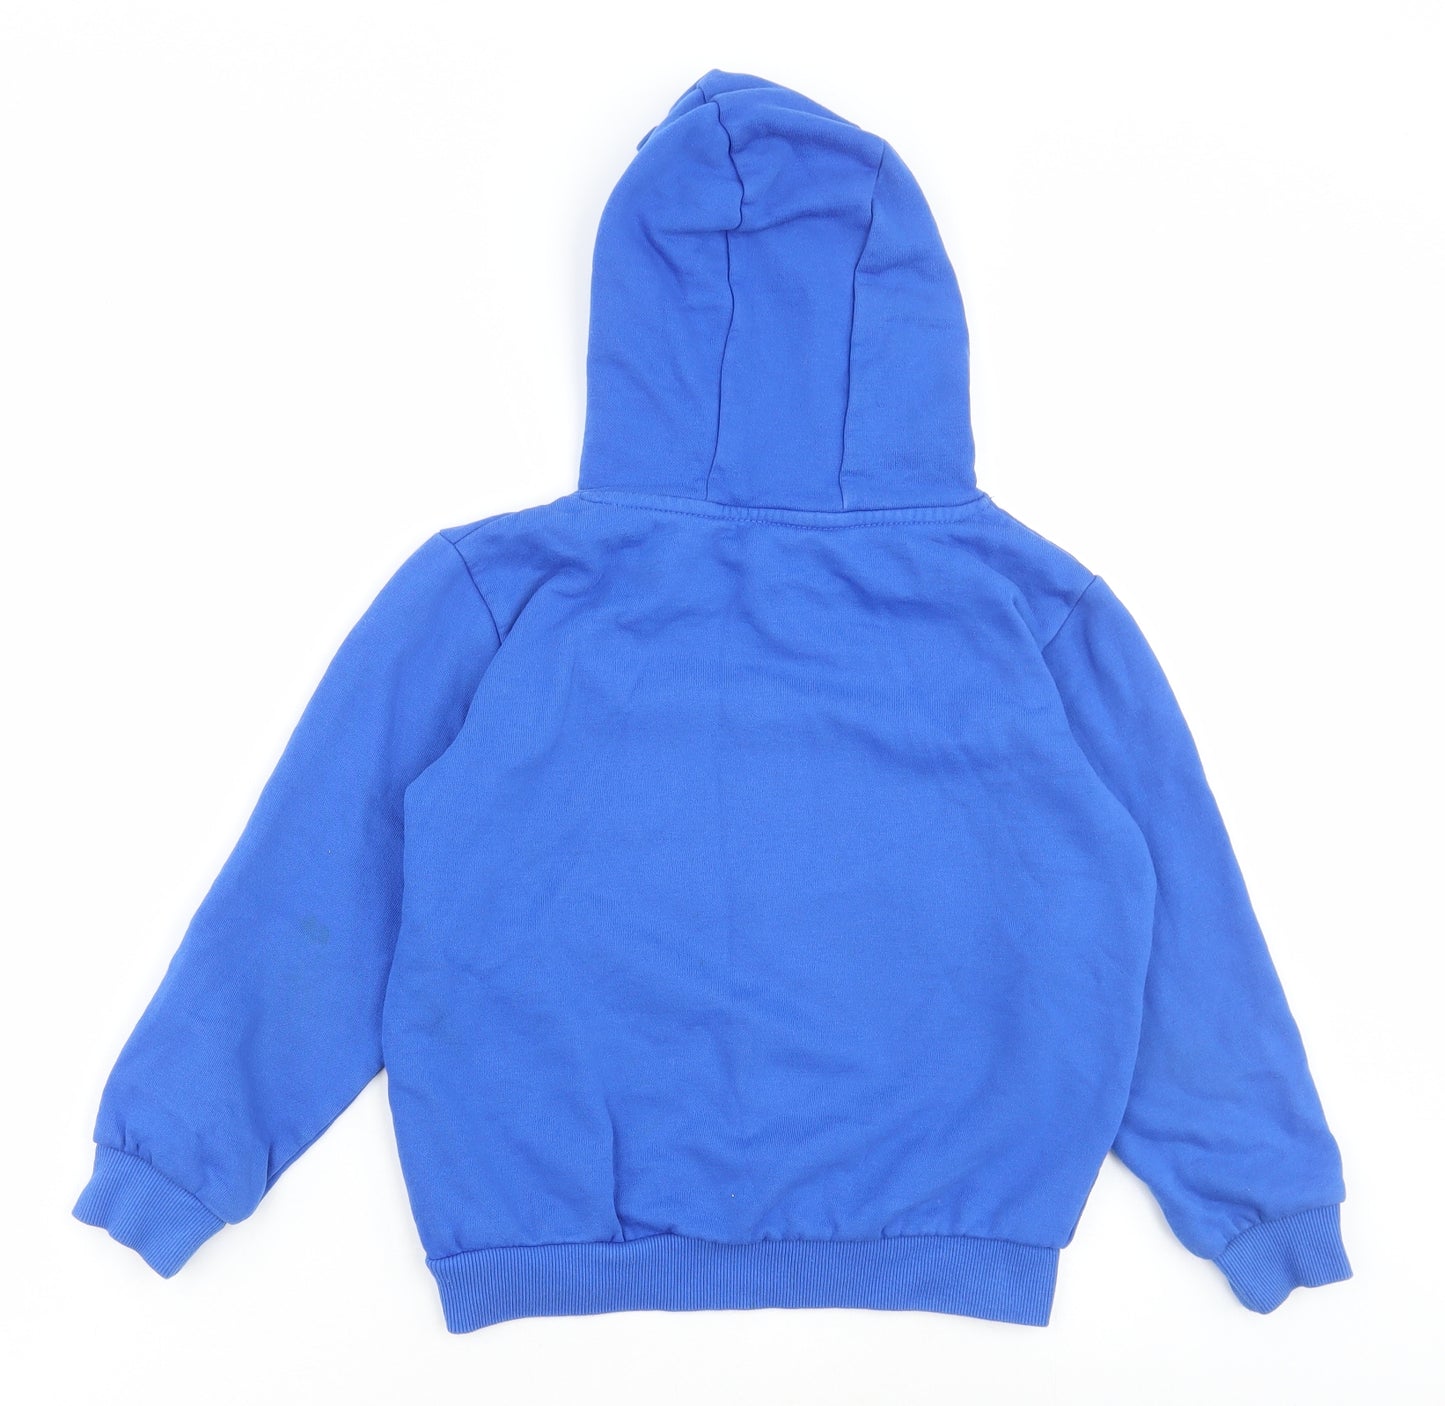 Dunnes Stores Boys Blue Cotton Pullover Hoodie Size 9-10 Years - Marvel Peak